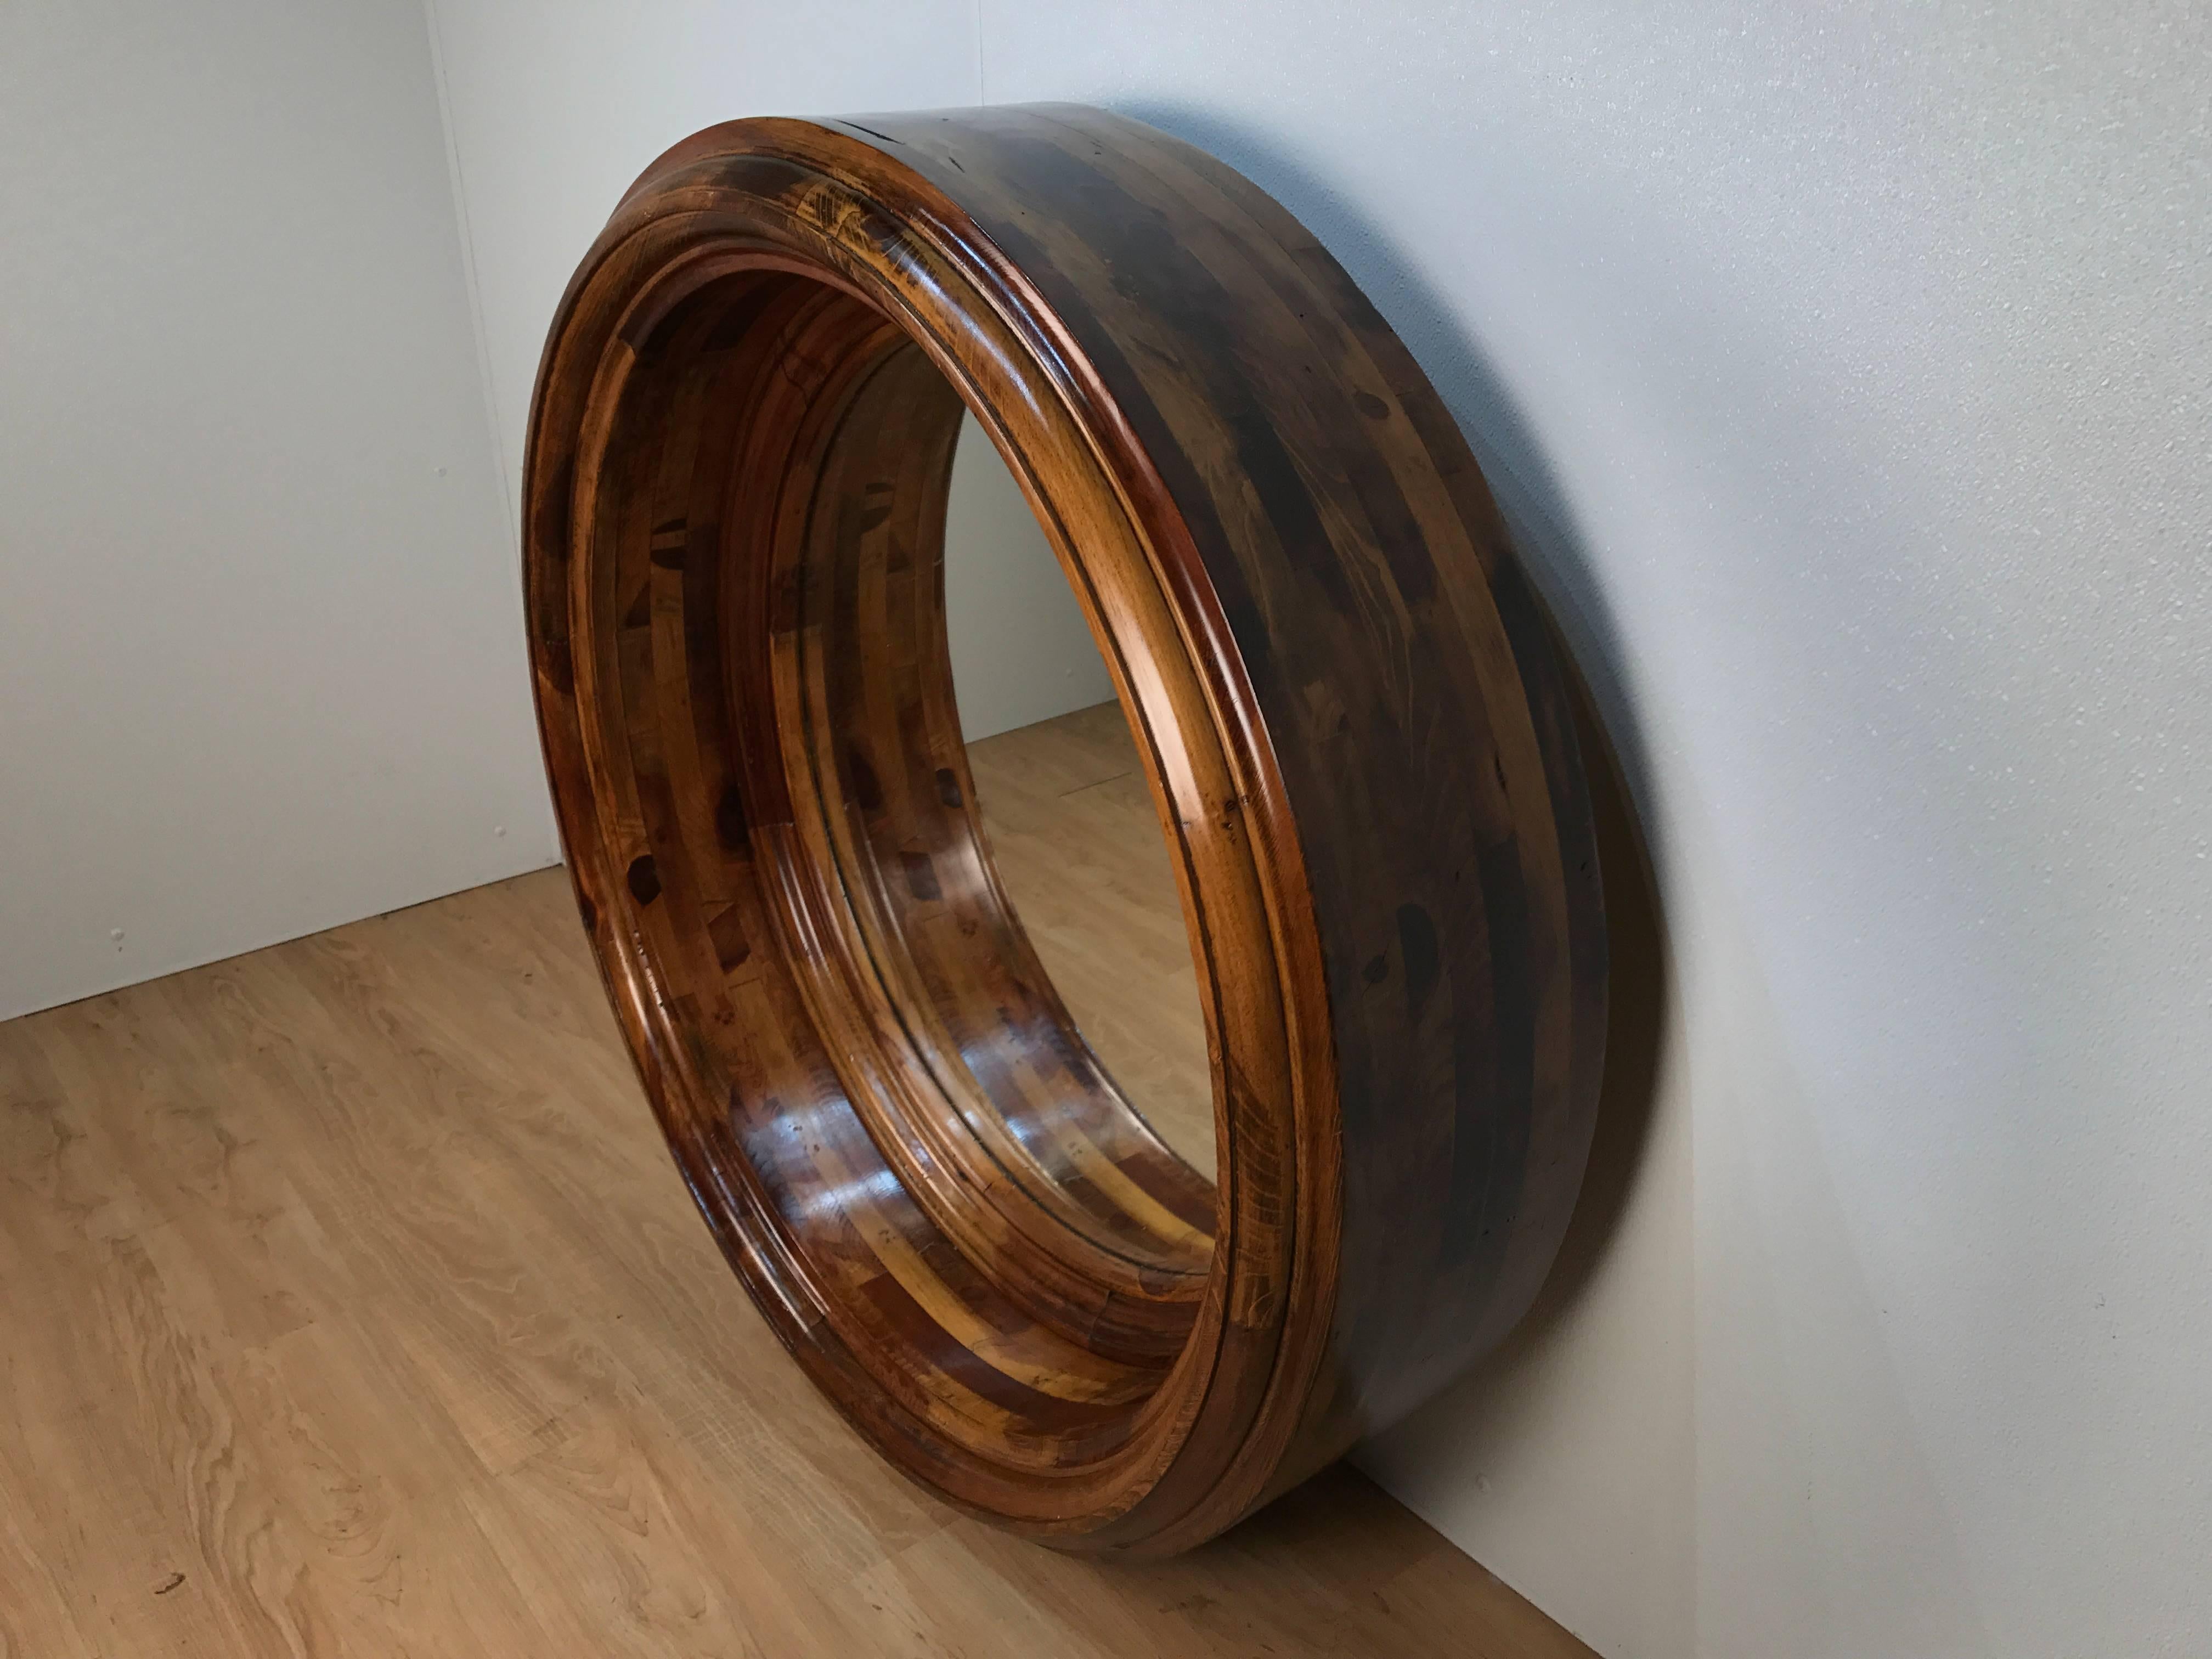 Massive circular porthole mirror, deep with continuous inlaid wood strips in the Treen tradition.